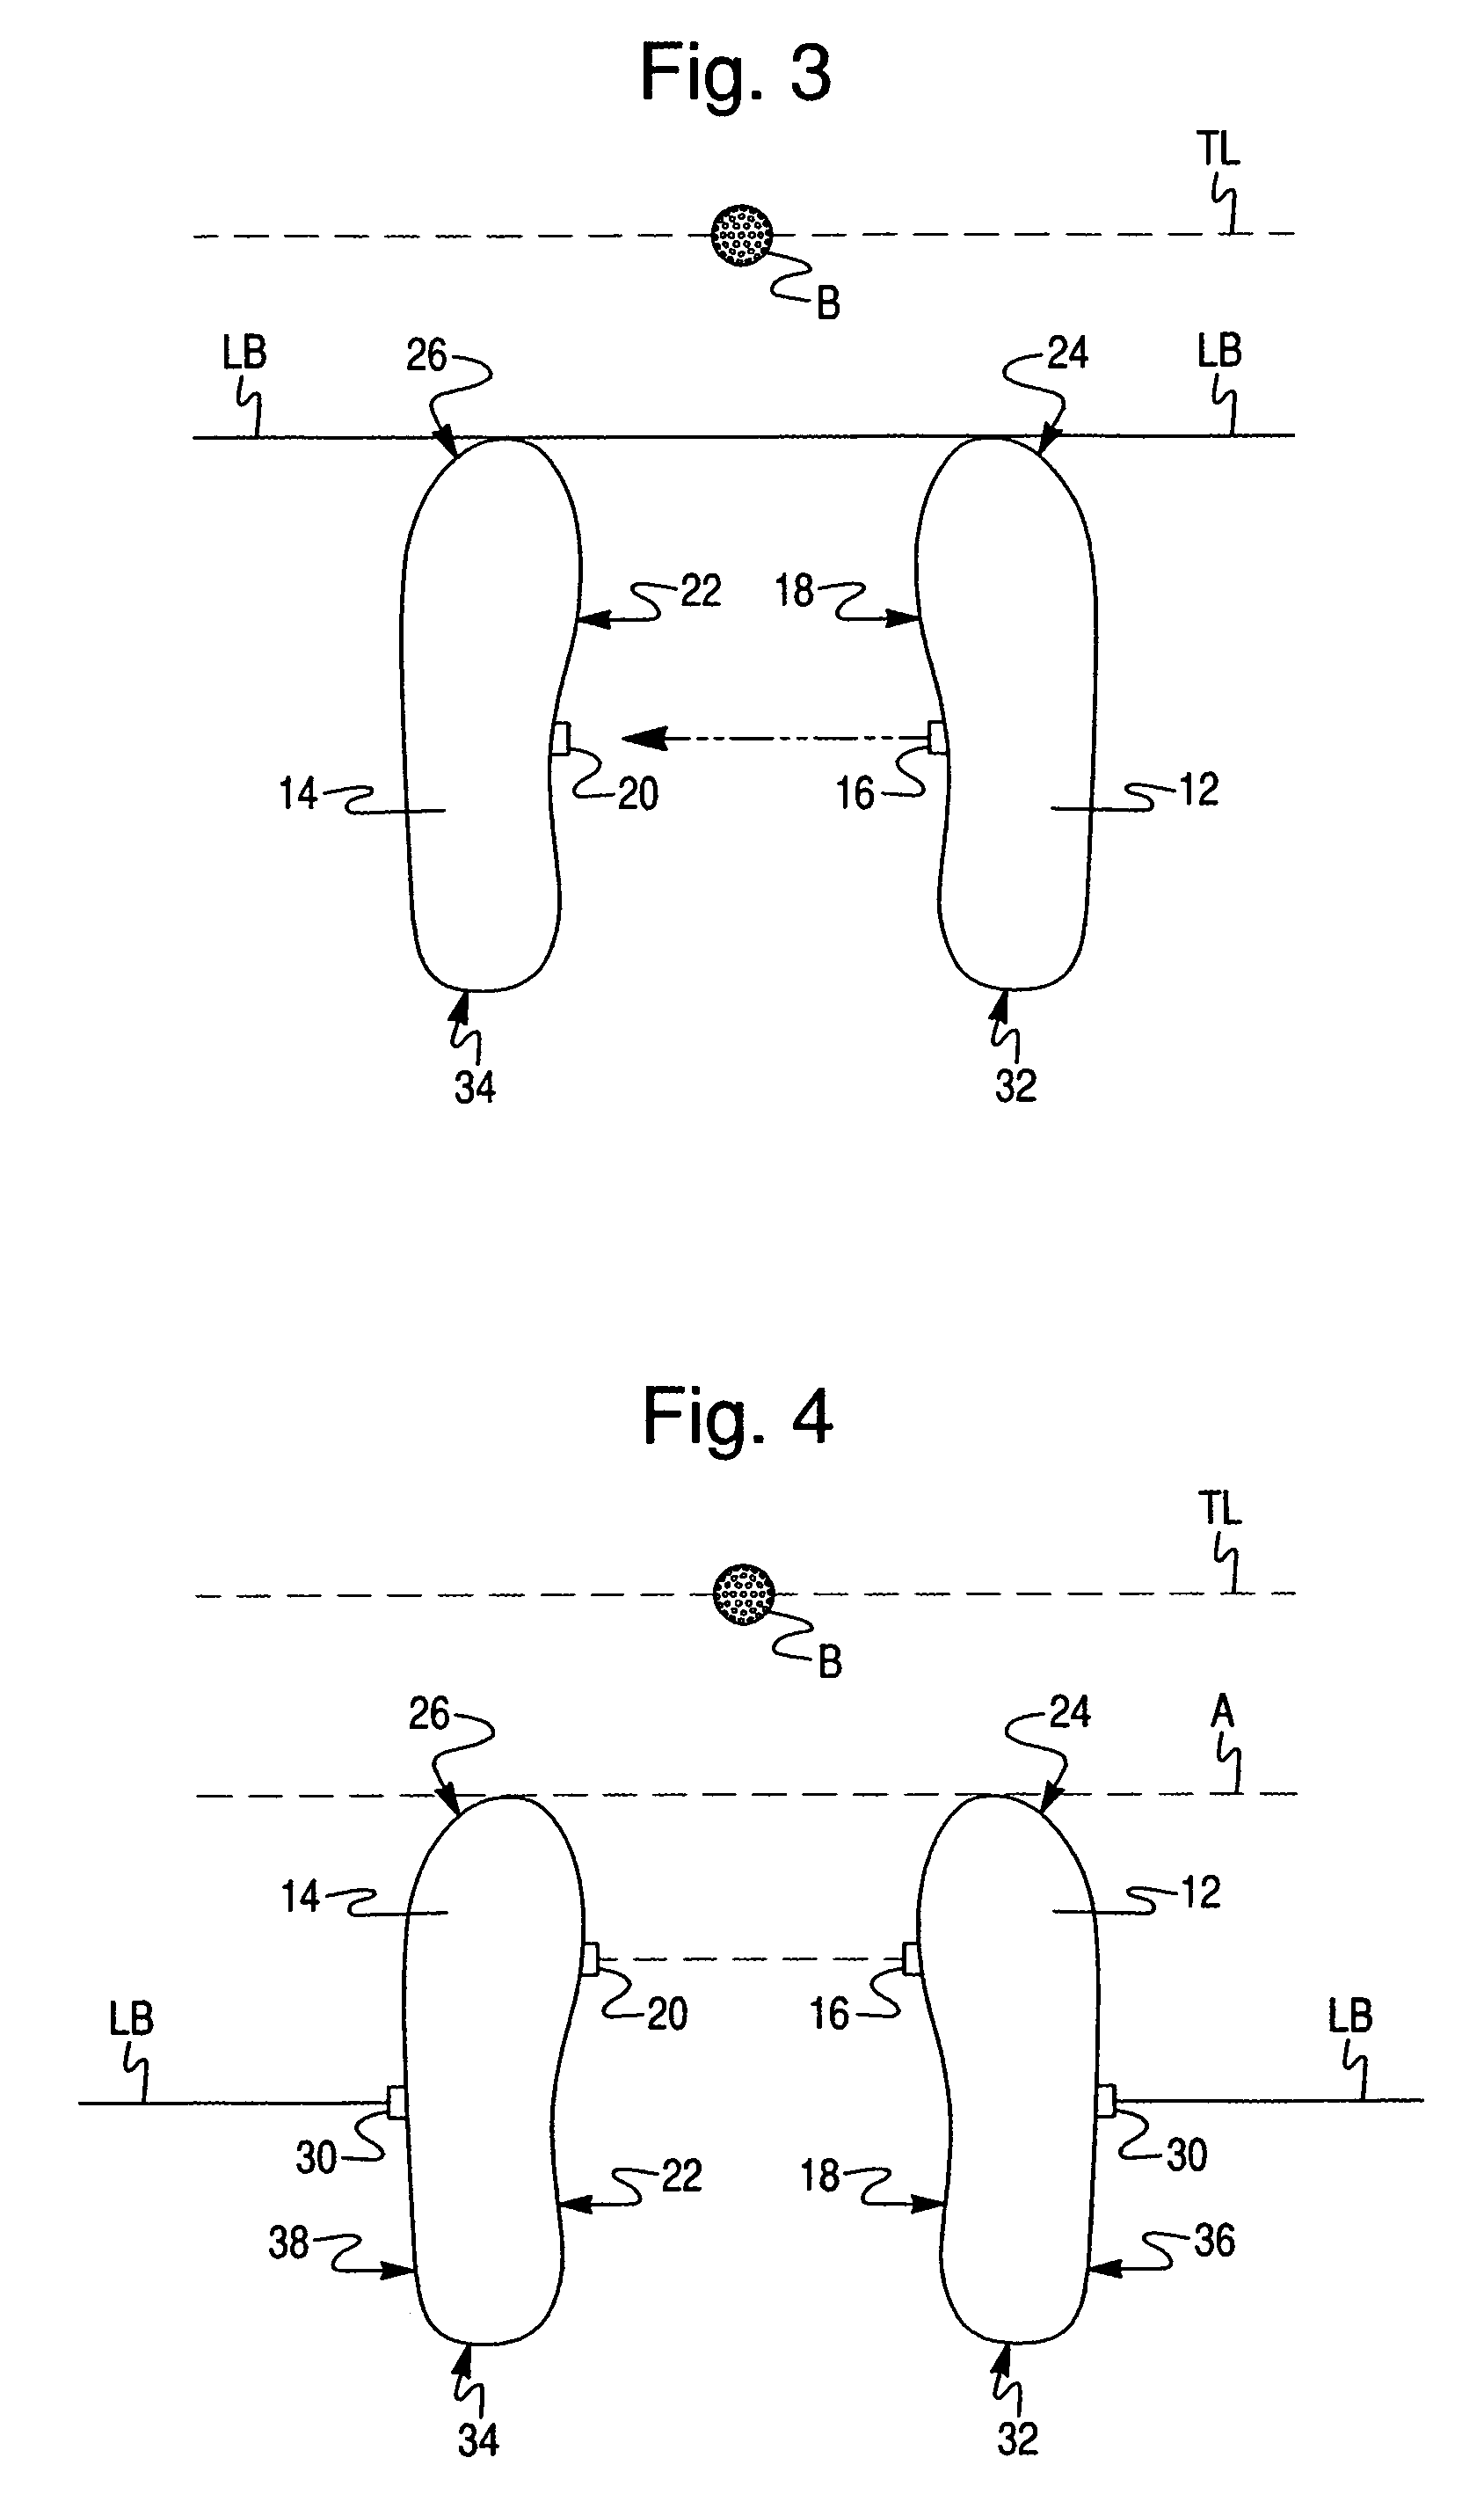 Golf alignment device, method and apparatus